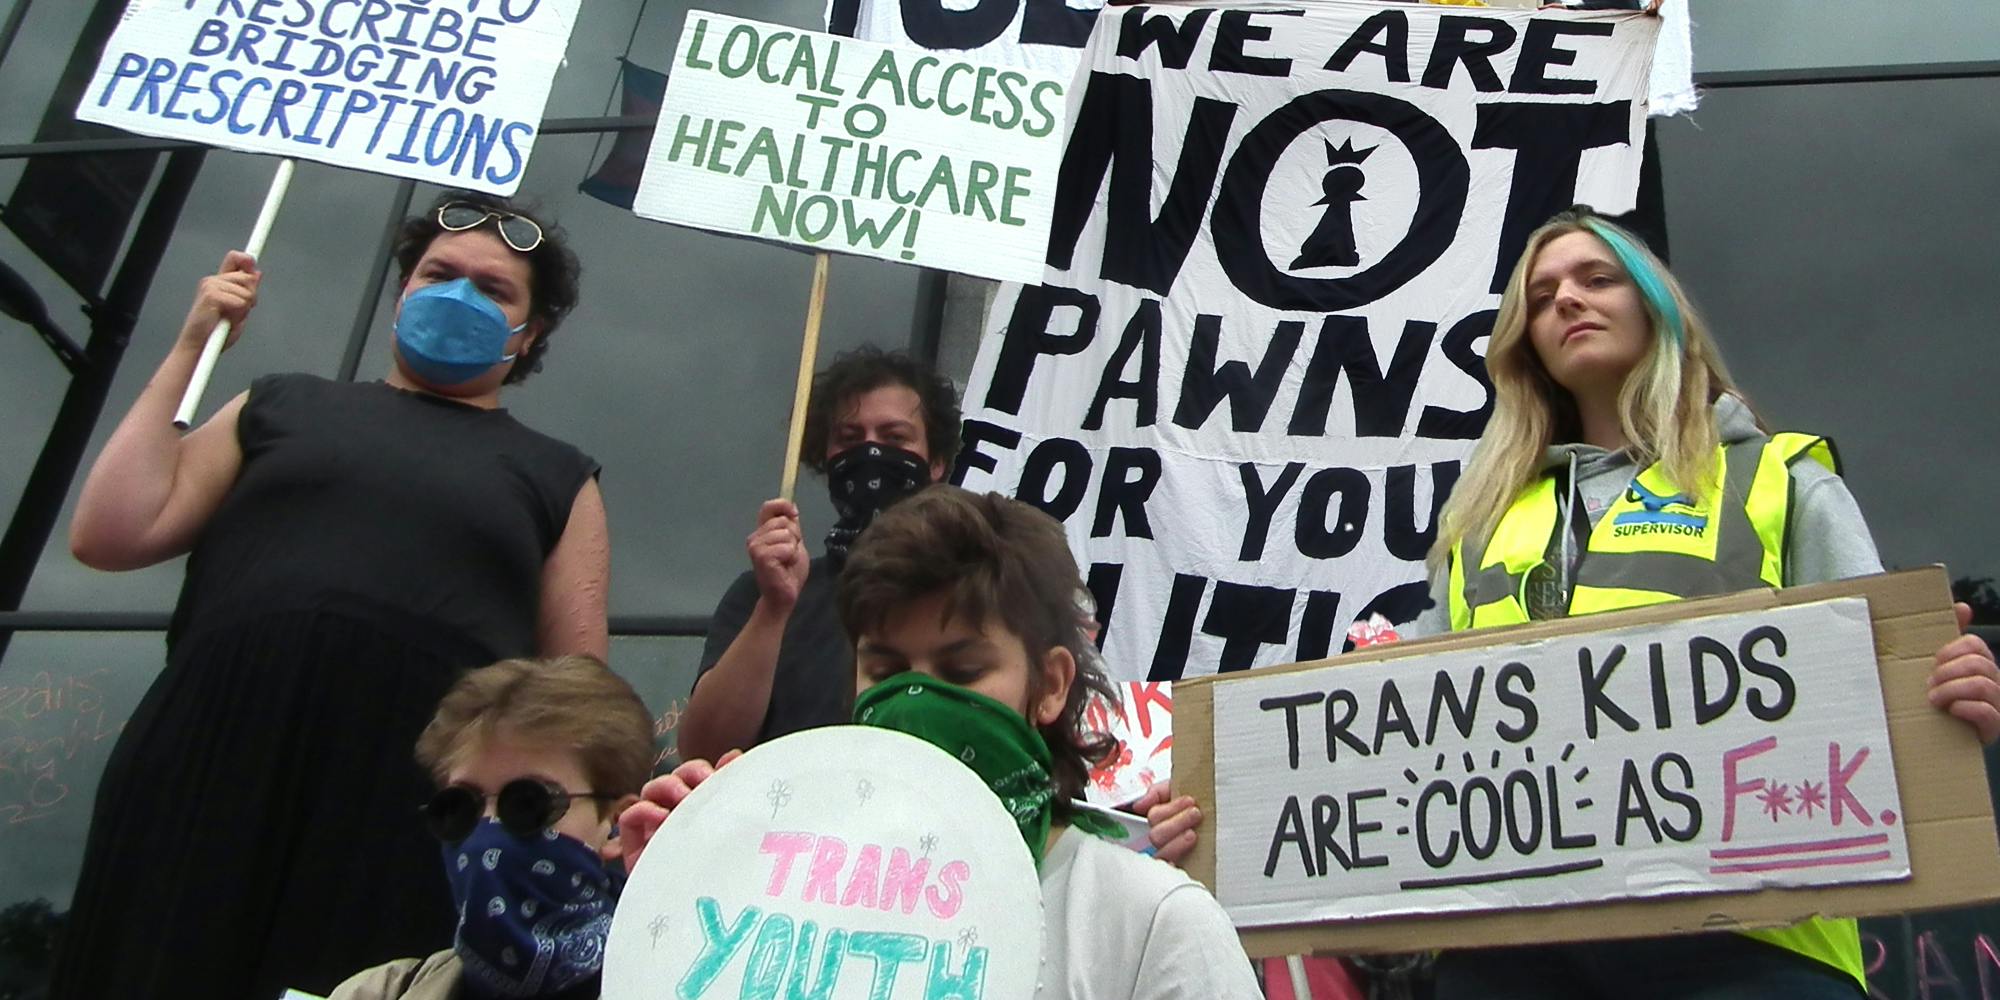 ‘We are not pawns for politics’: Trans kids occupy NHS building to protest puberty blocker ban